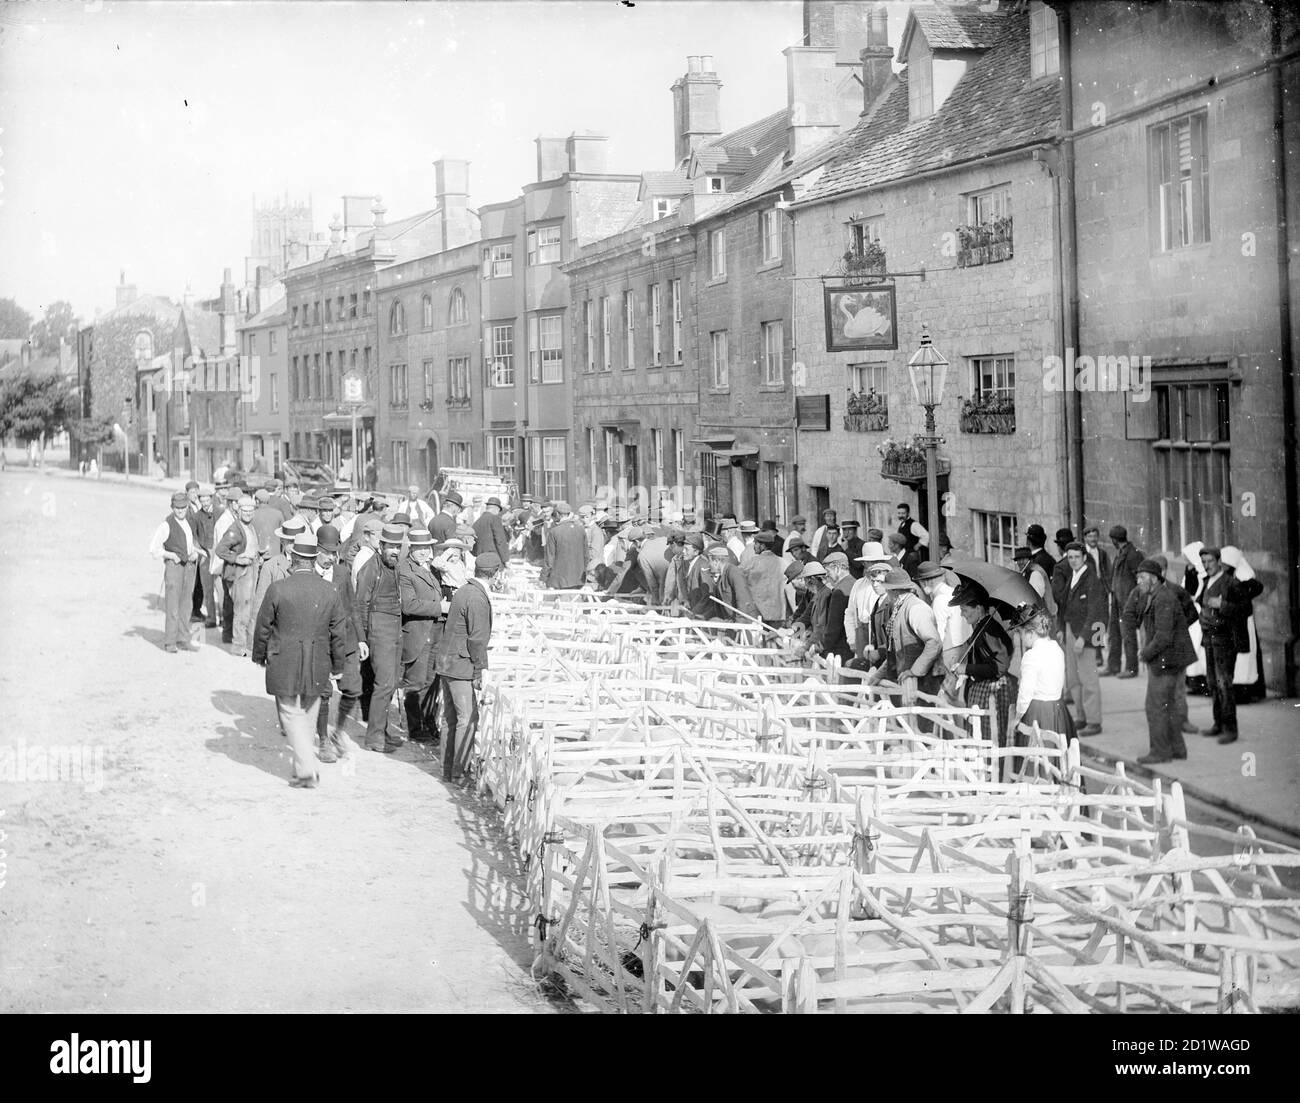 High Street, Chipping Campden, Cotswold, Gloucestershire. Looking down the street during the Pig Market outside the Swan Inn with a crowd gathered around the pig pens. Stock Photo